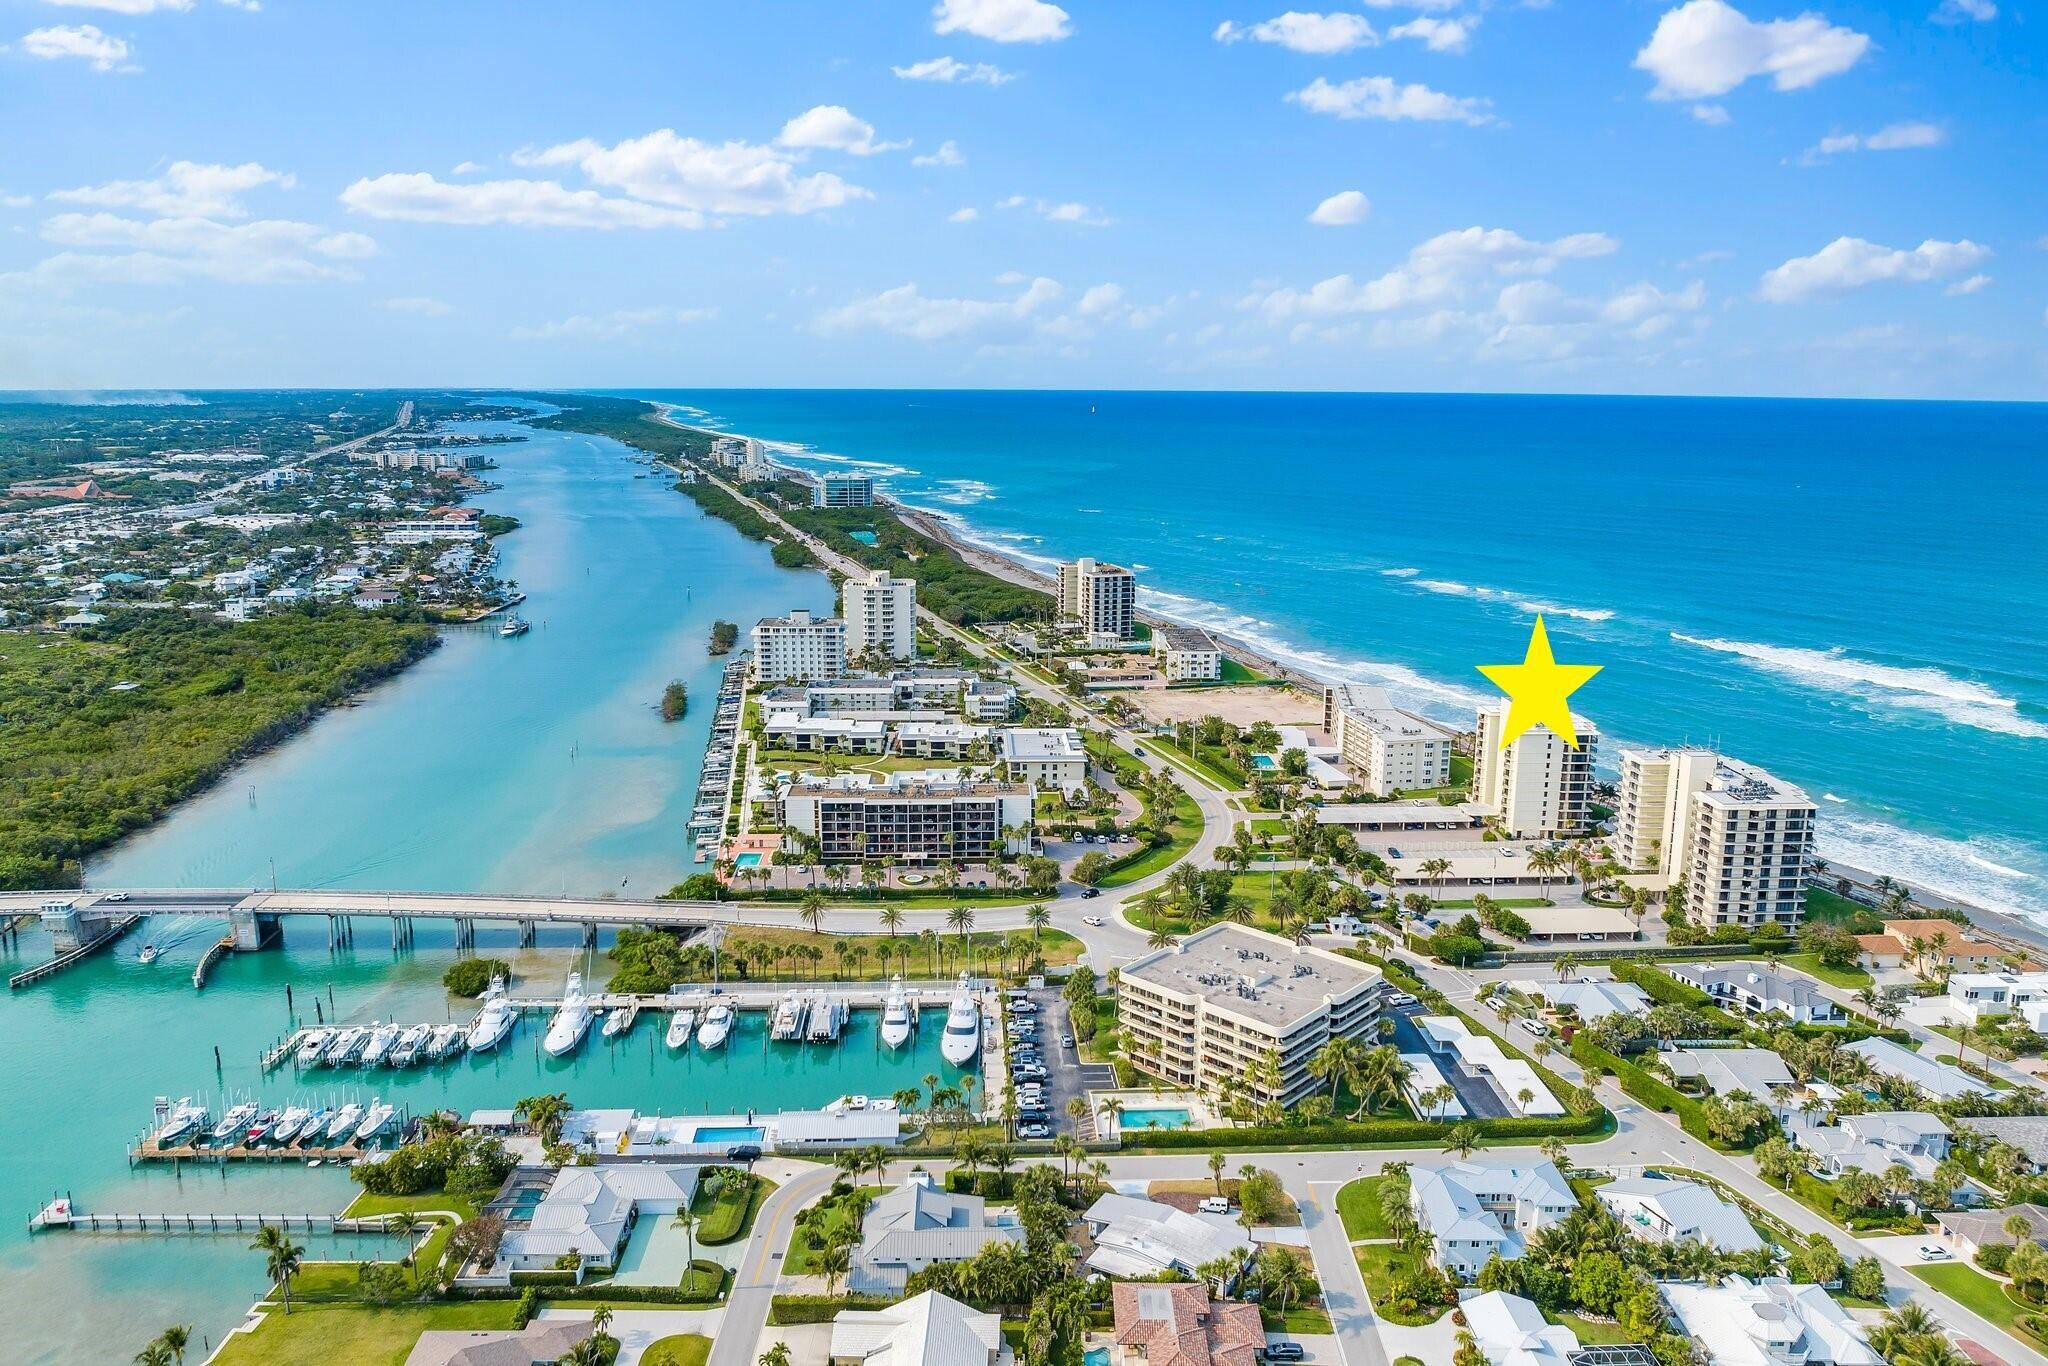 Stunning direct ocean views from this 4th floor furnished Jupiter Island condo.